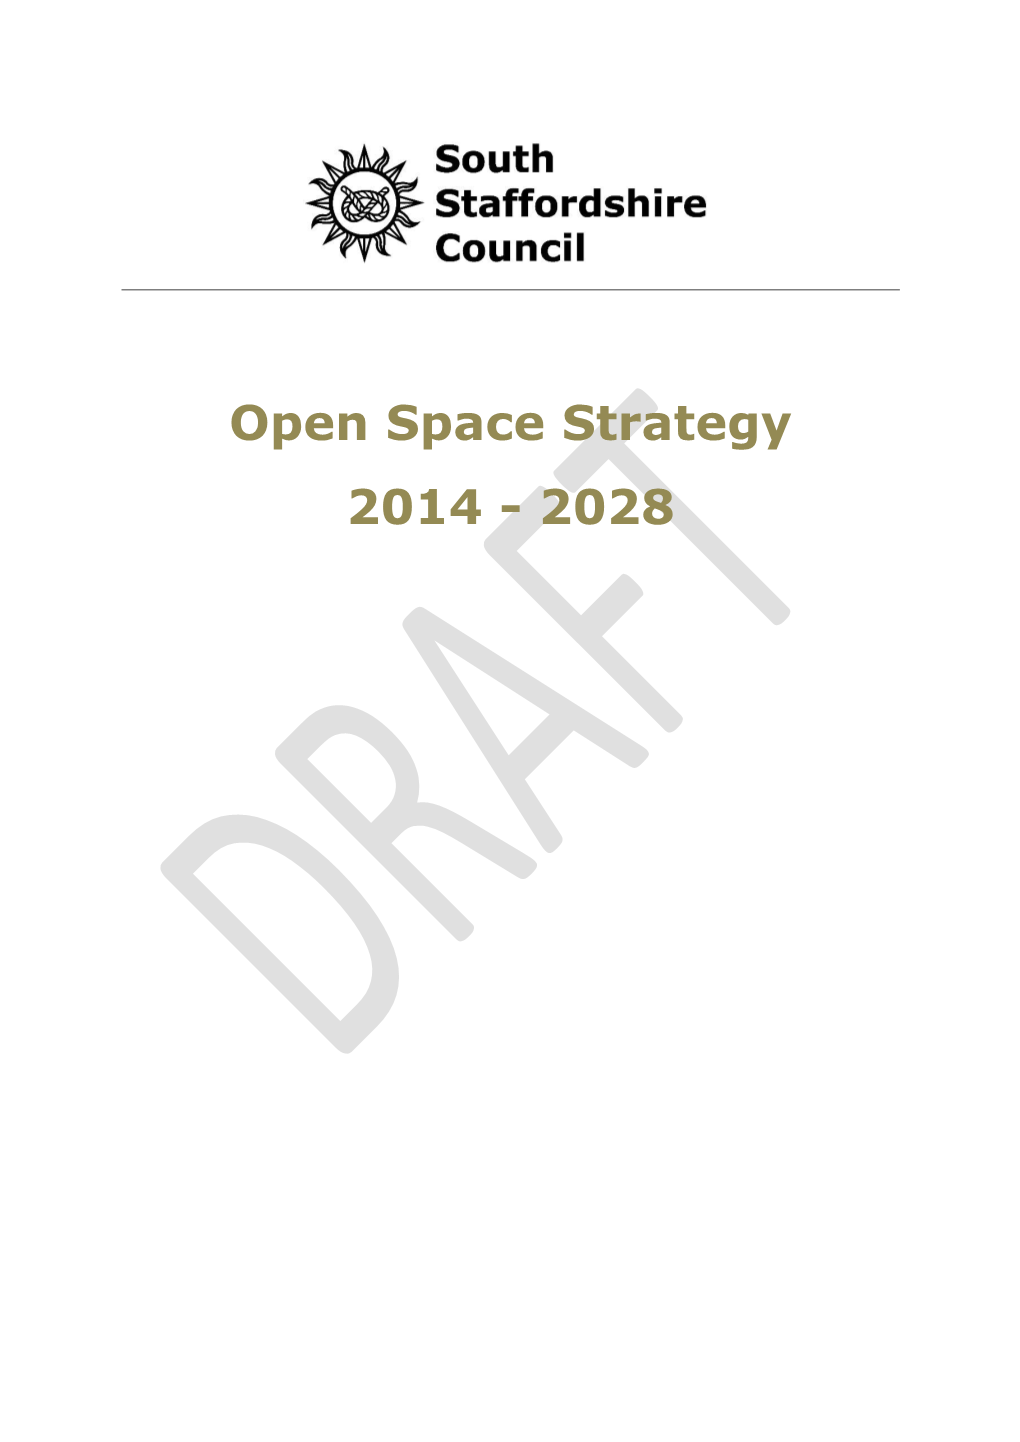 Open Space Strategy 2014 - 2028